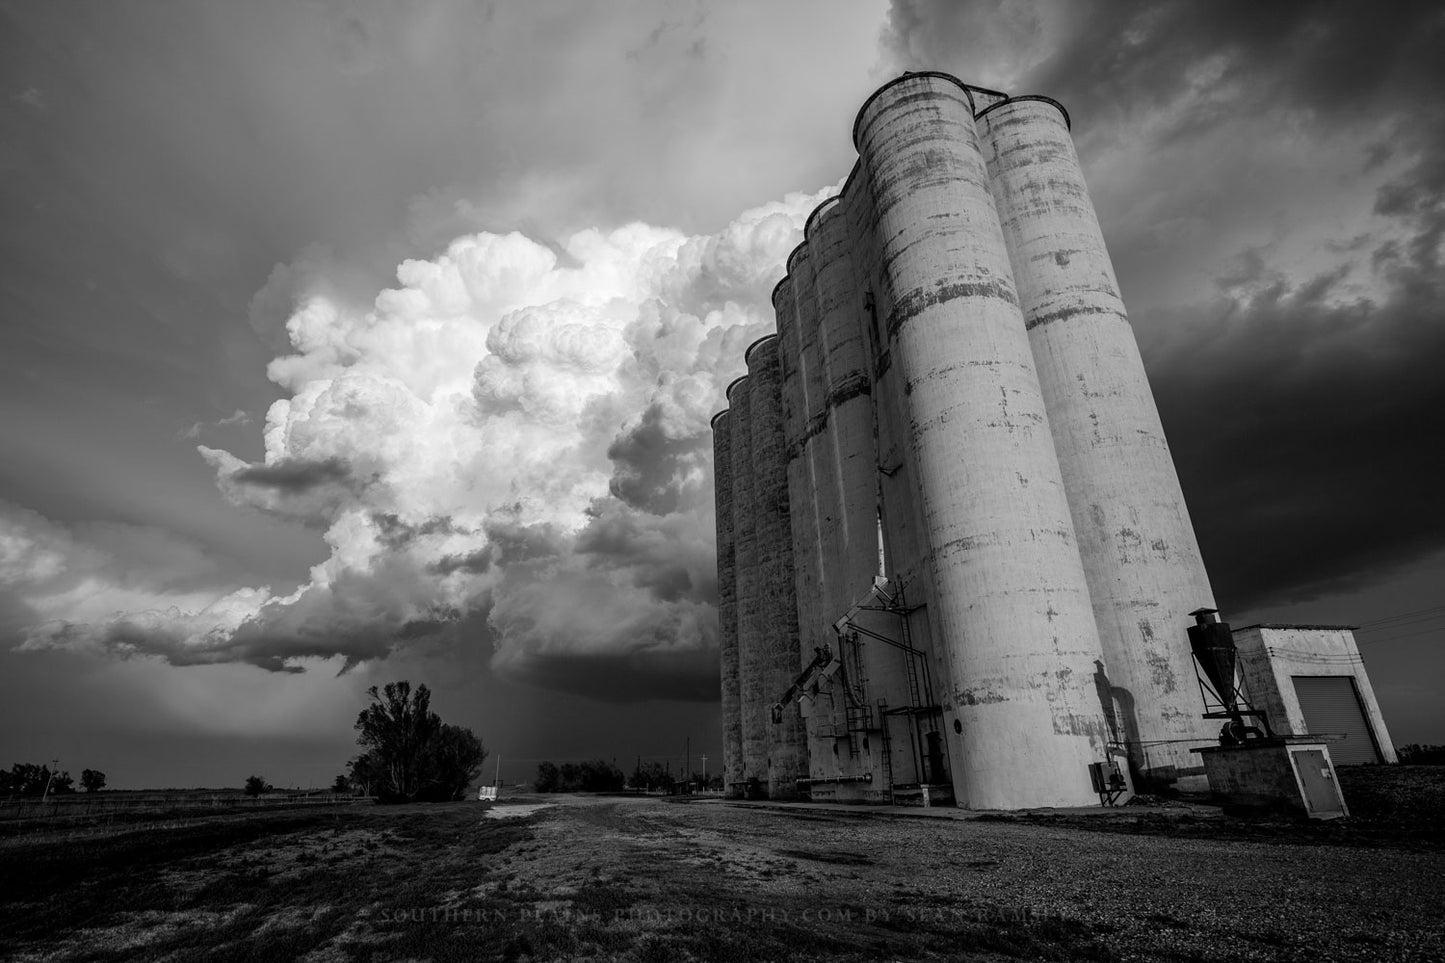 Black and white photography print of a storm cloud over a grain elevator in the ghost town of Sitka, Kansas by Sean Ramsey of Southern Plains Photography.